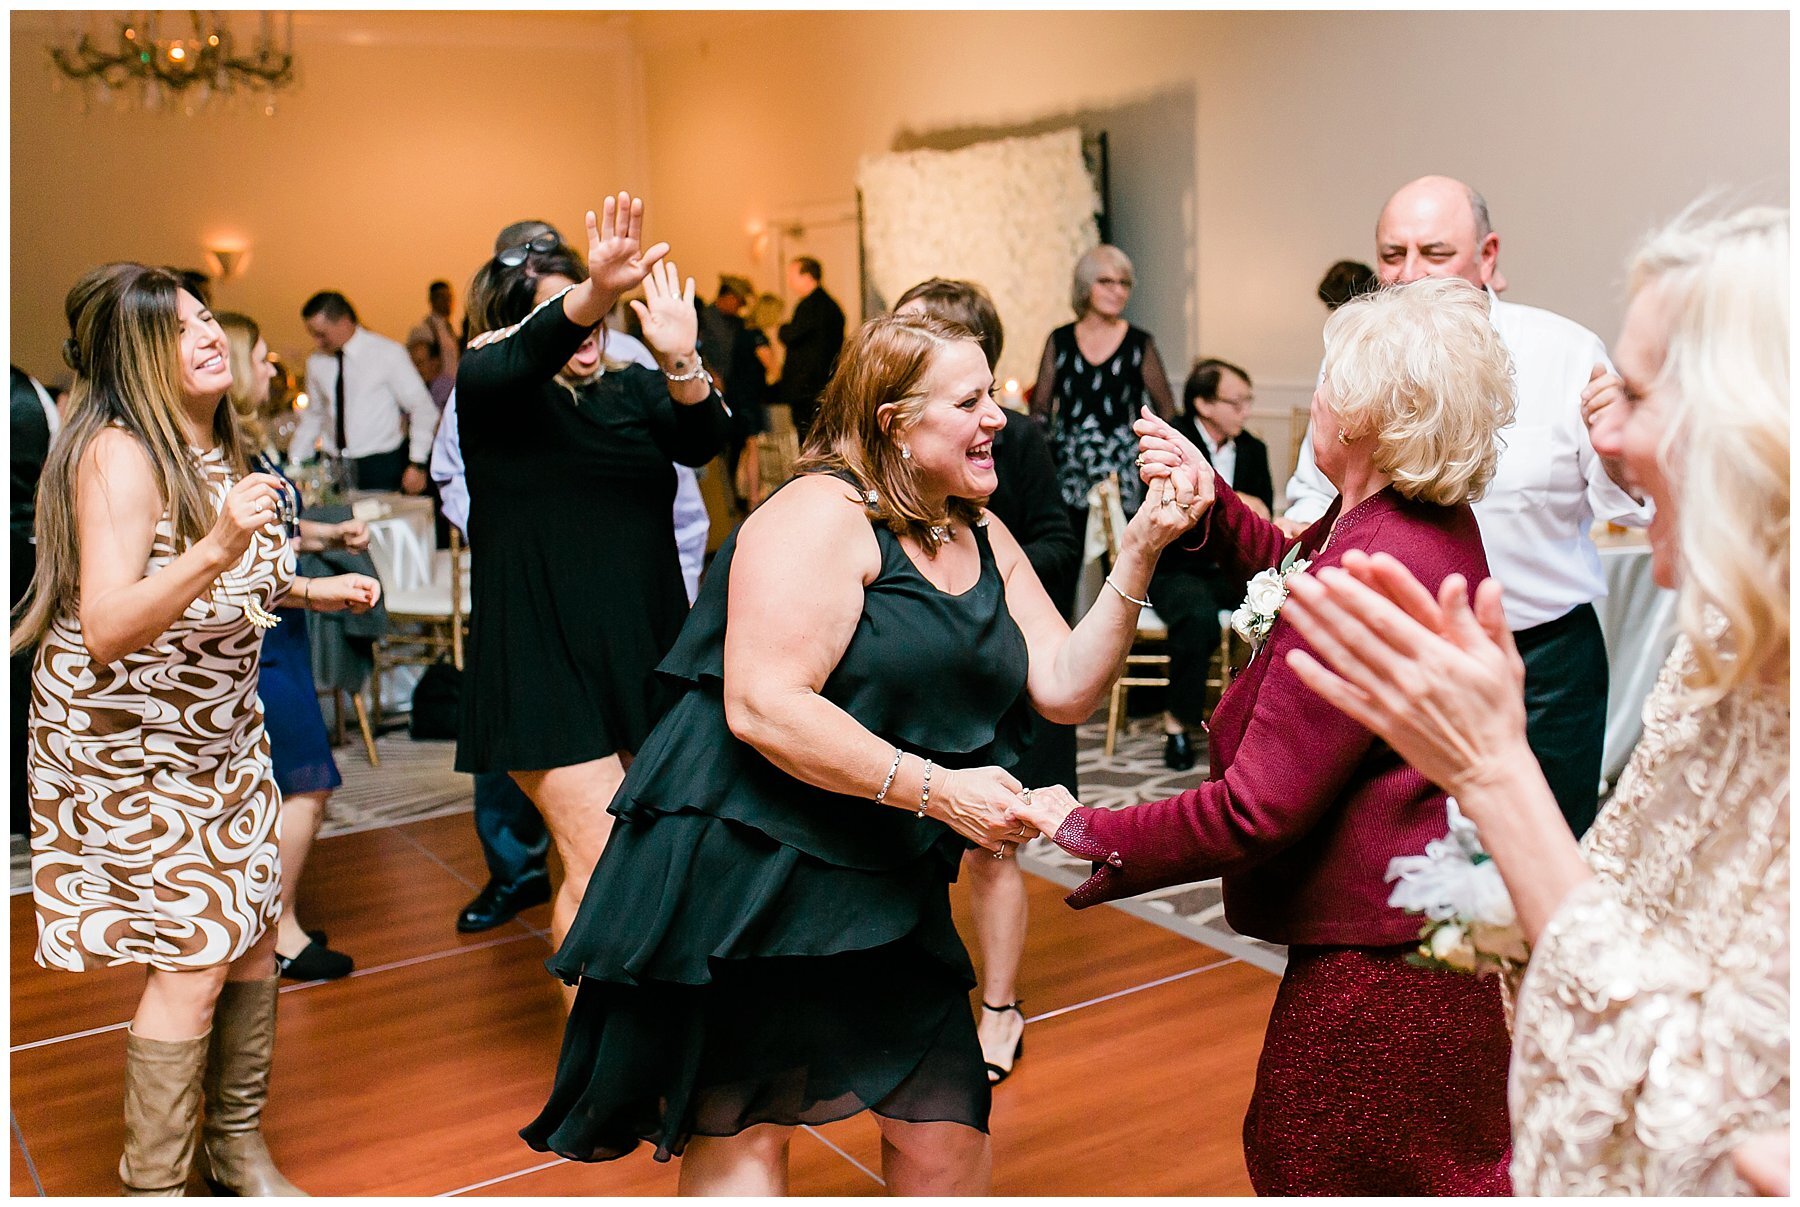  guests dancing at the reception  